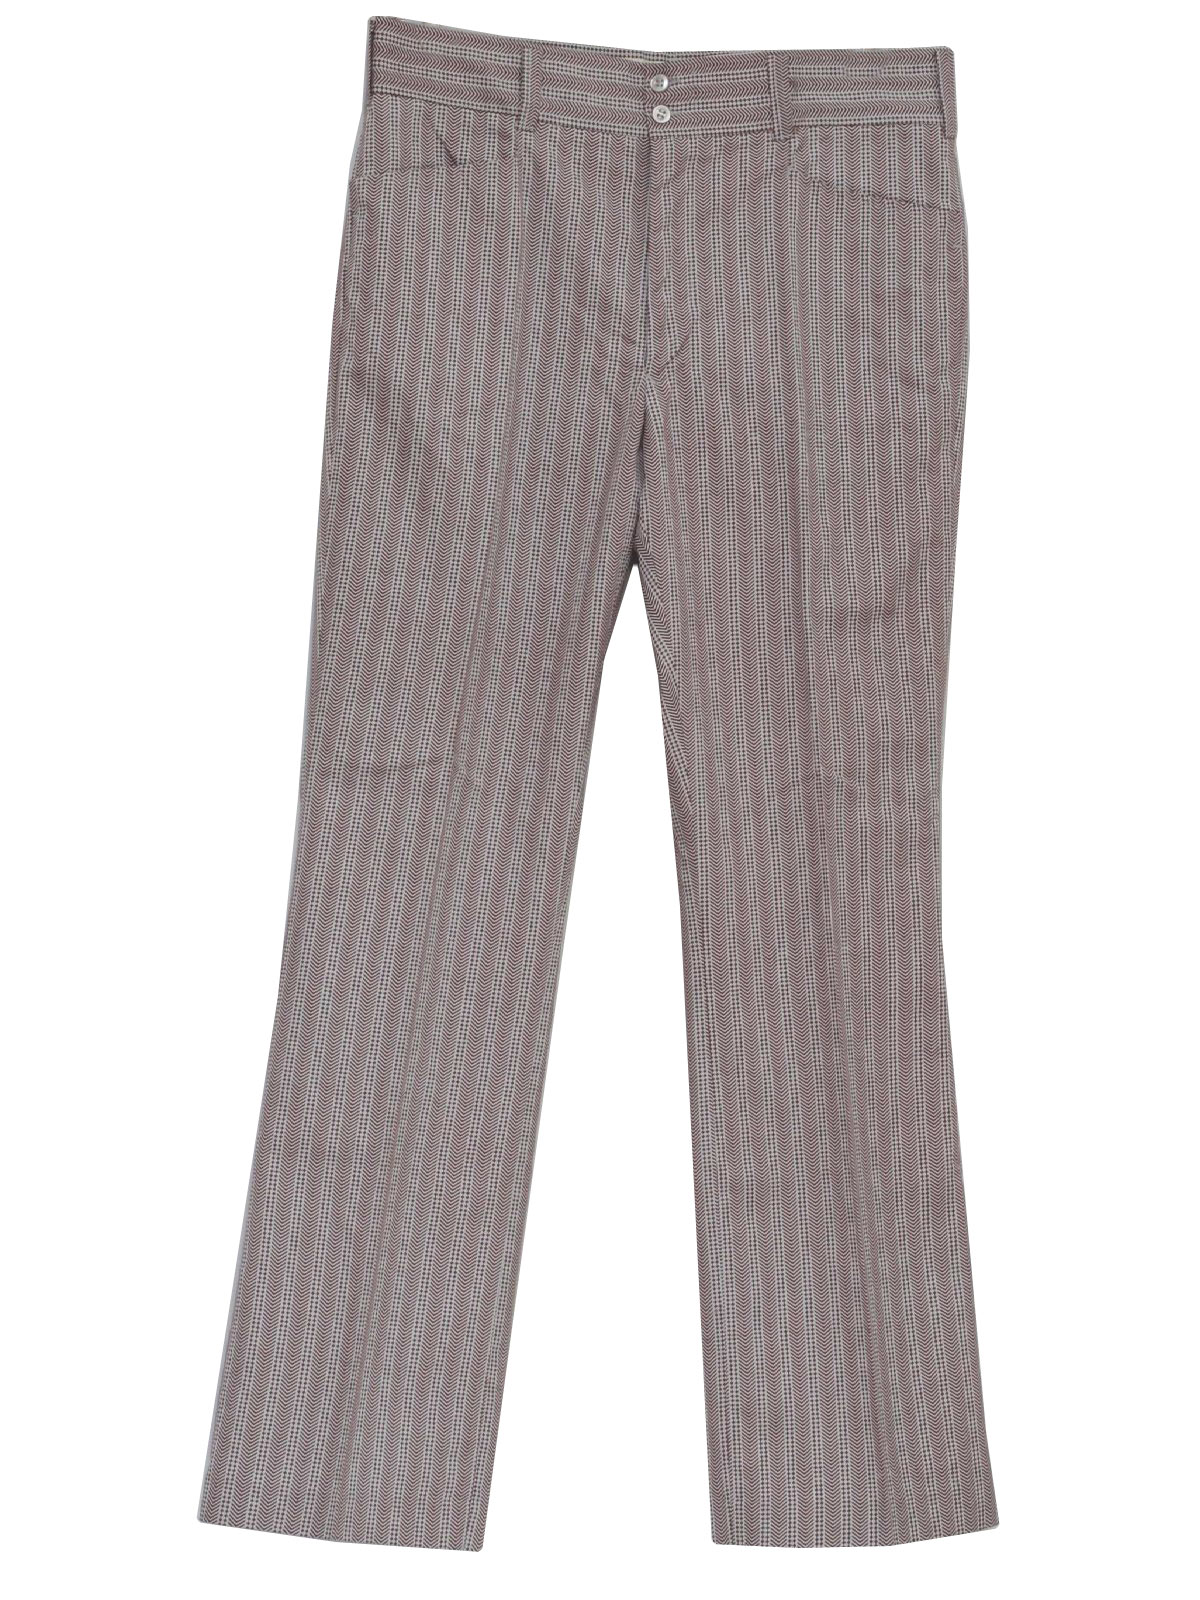 70's Permanent Press Pants: 70s -Permanent Press- Mens maroon and white ...